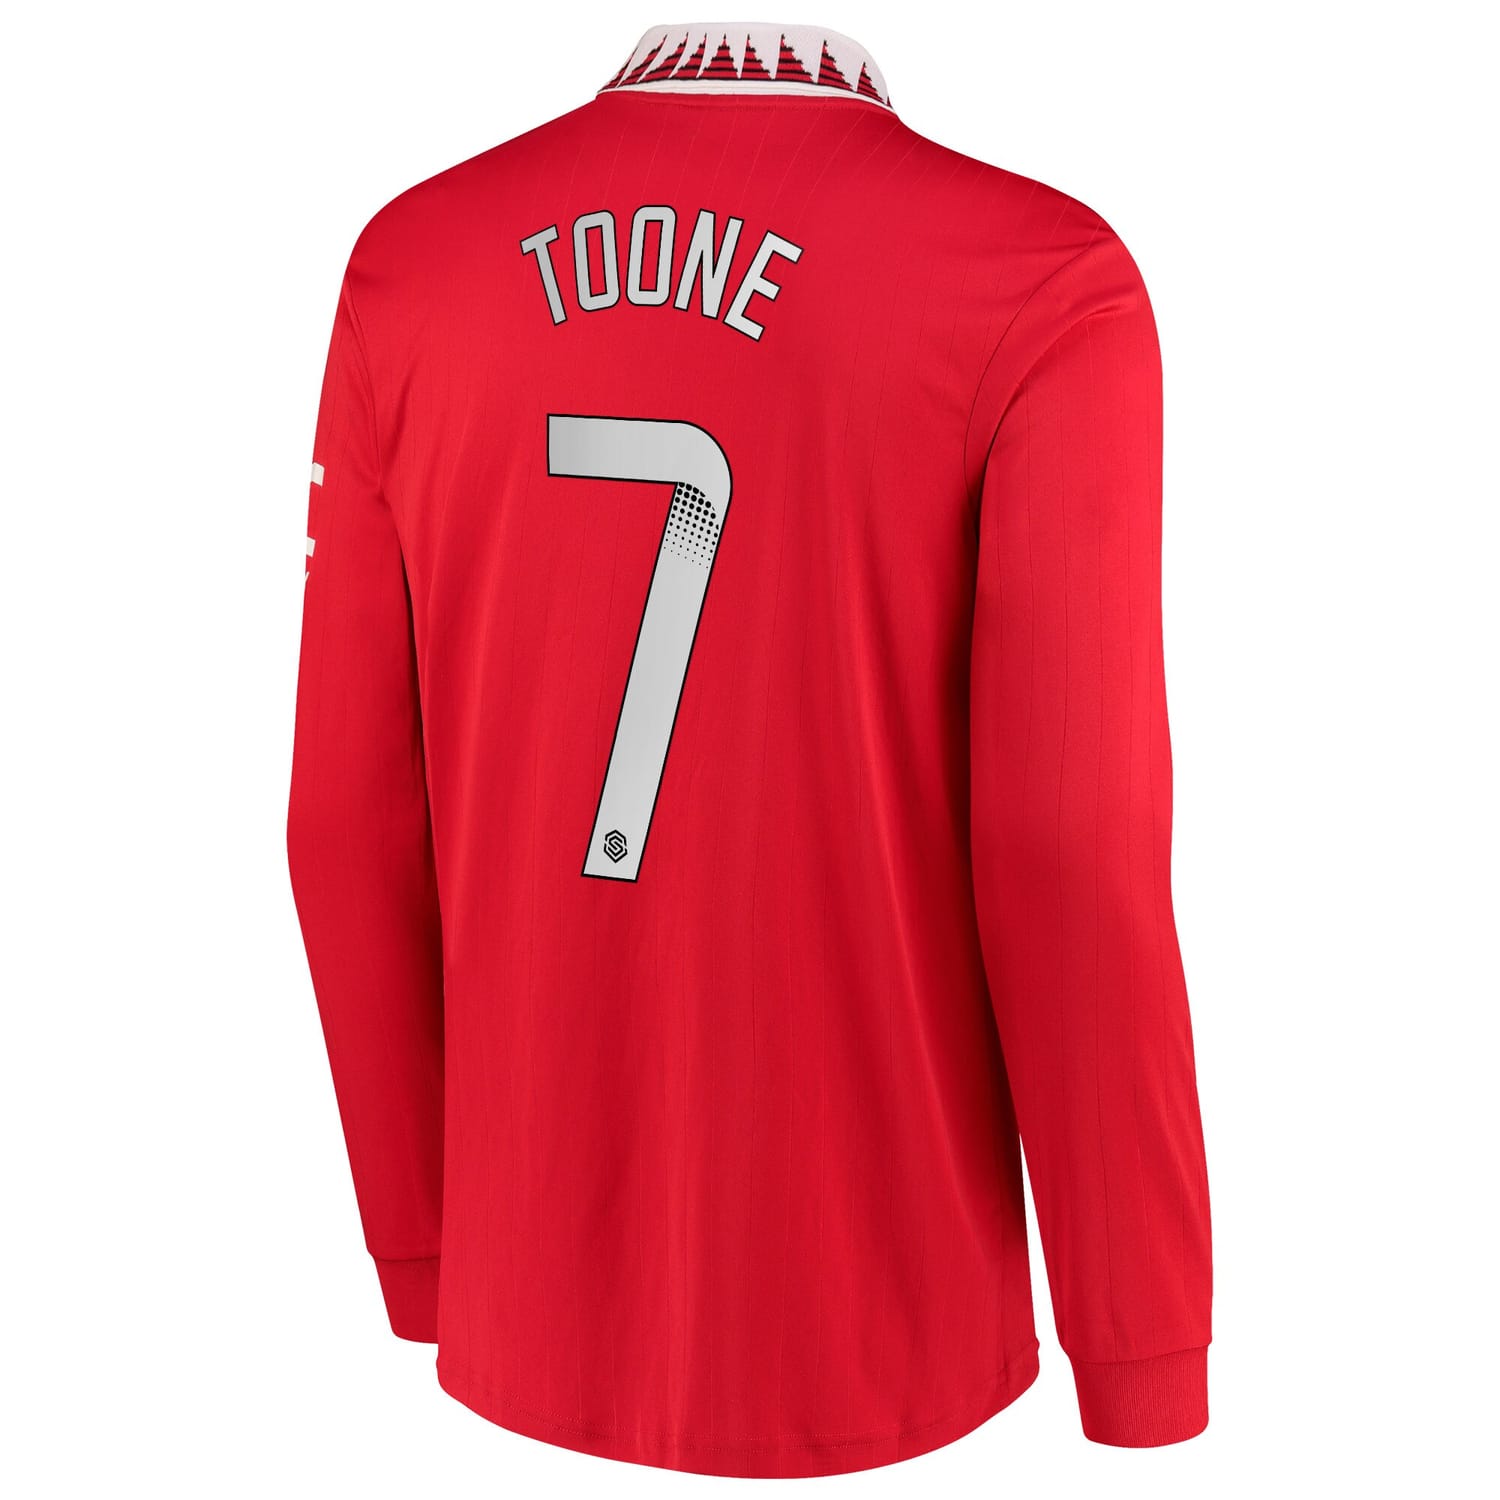 Premier League Manchester United Home WSL Jersey Shirt Long Sleeve 2022-23 player Ella Toone 7 printing for Men